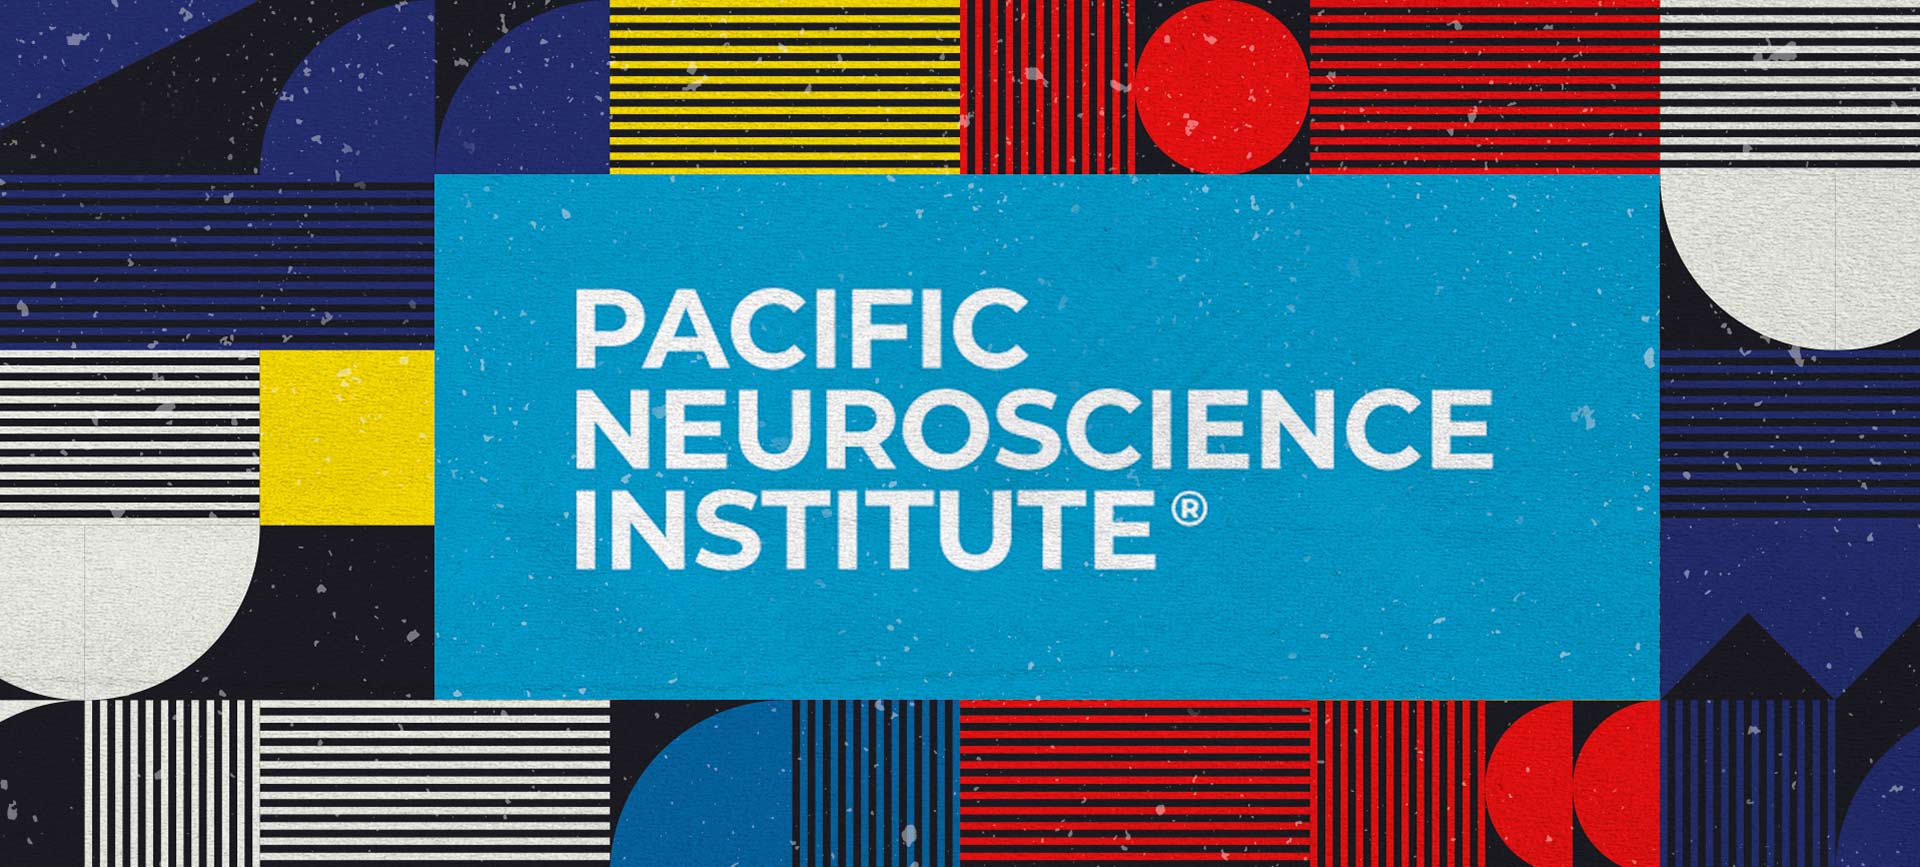 The logo for the Pacific Neuroscience Institute is laid against a multicolored background.